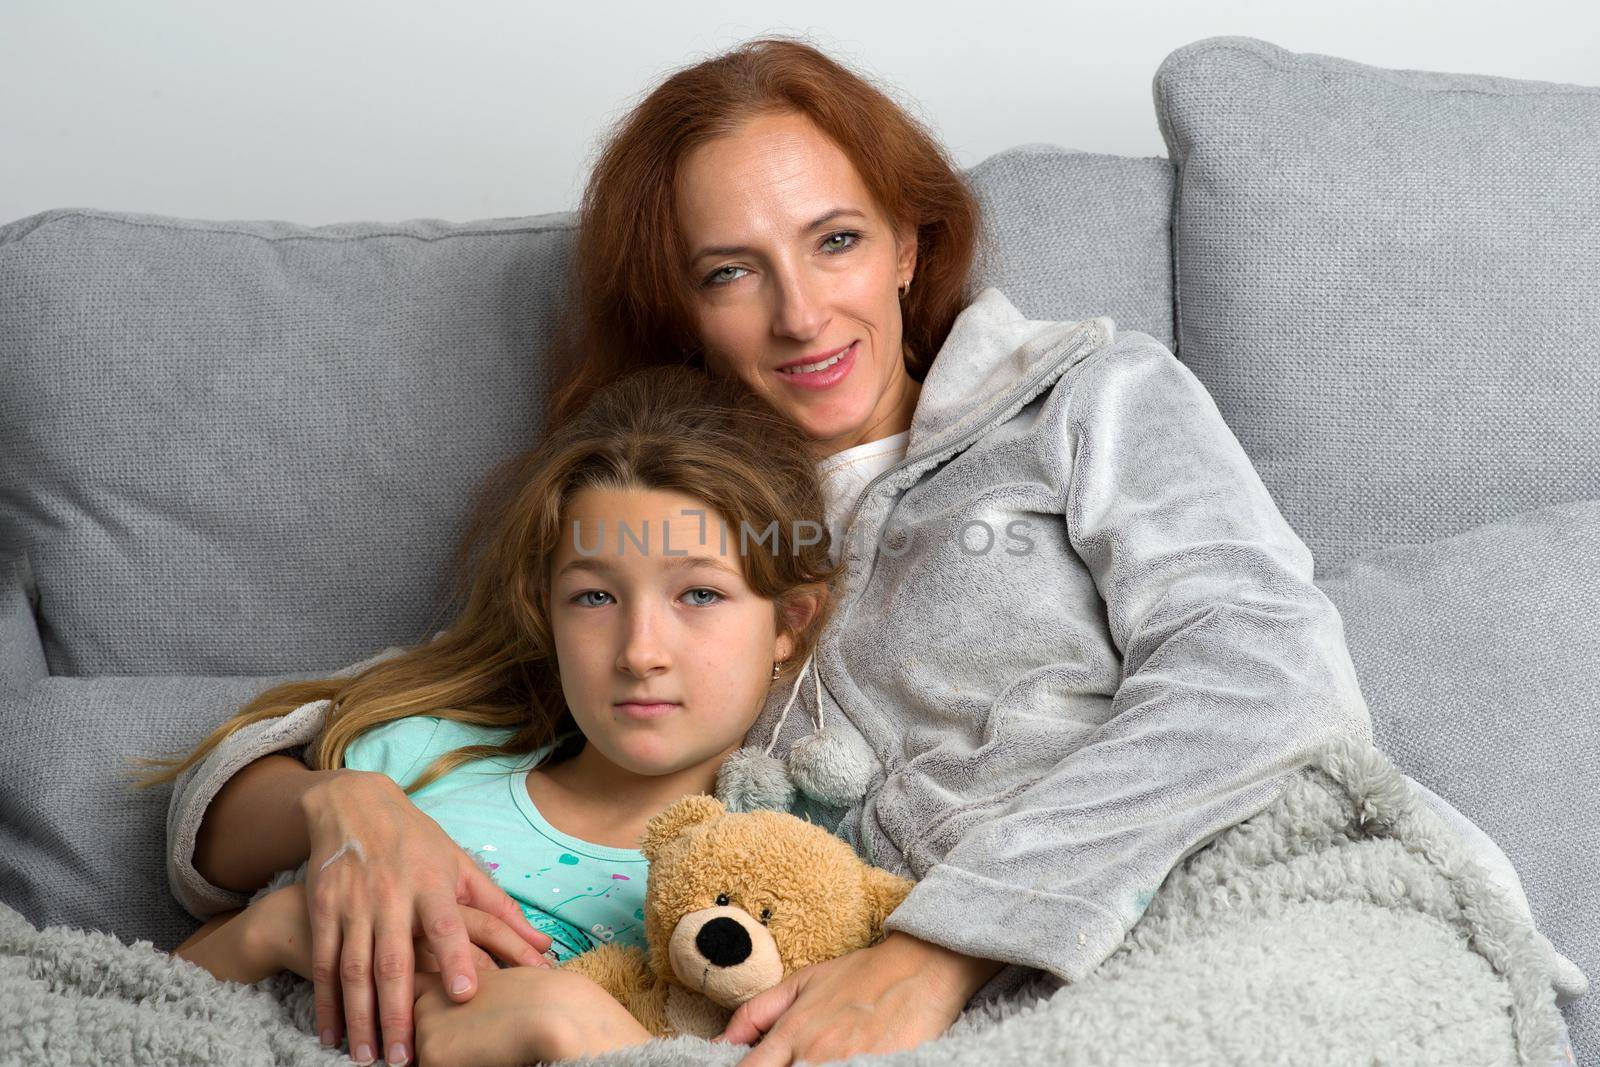 Mom sitting on couch with daughter by kolesnikov_studio